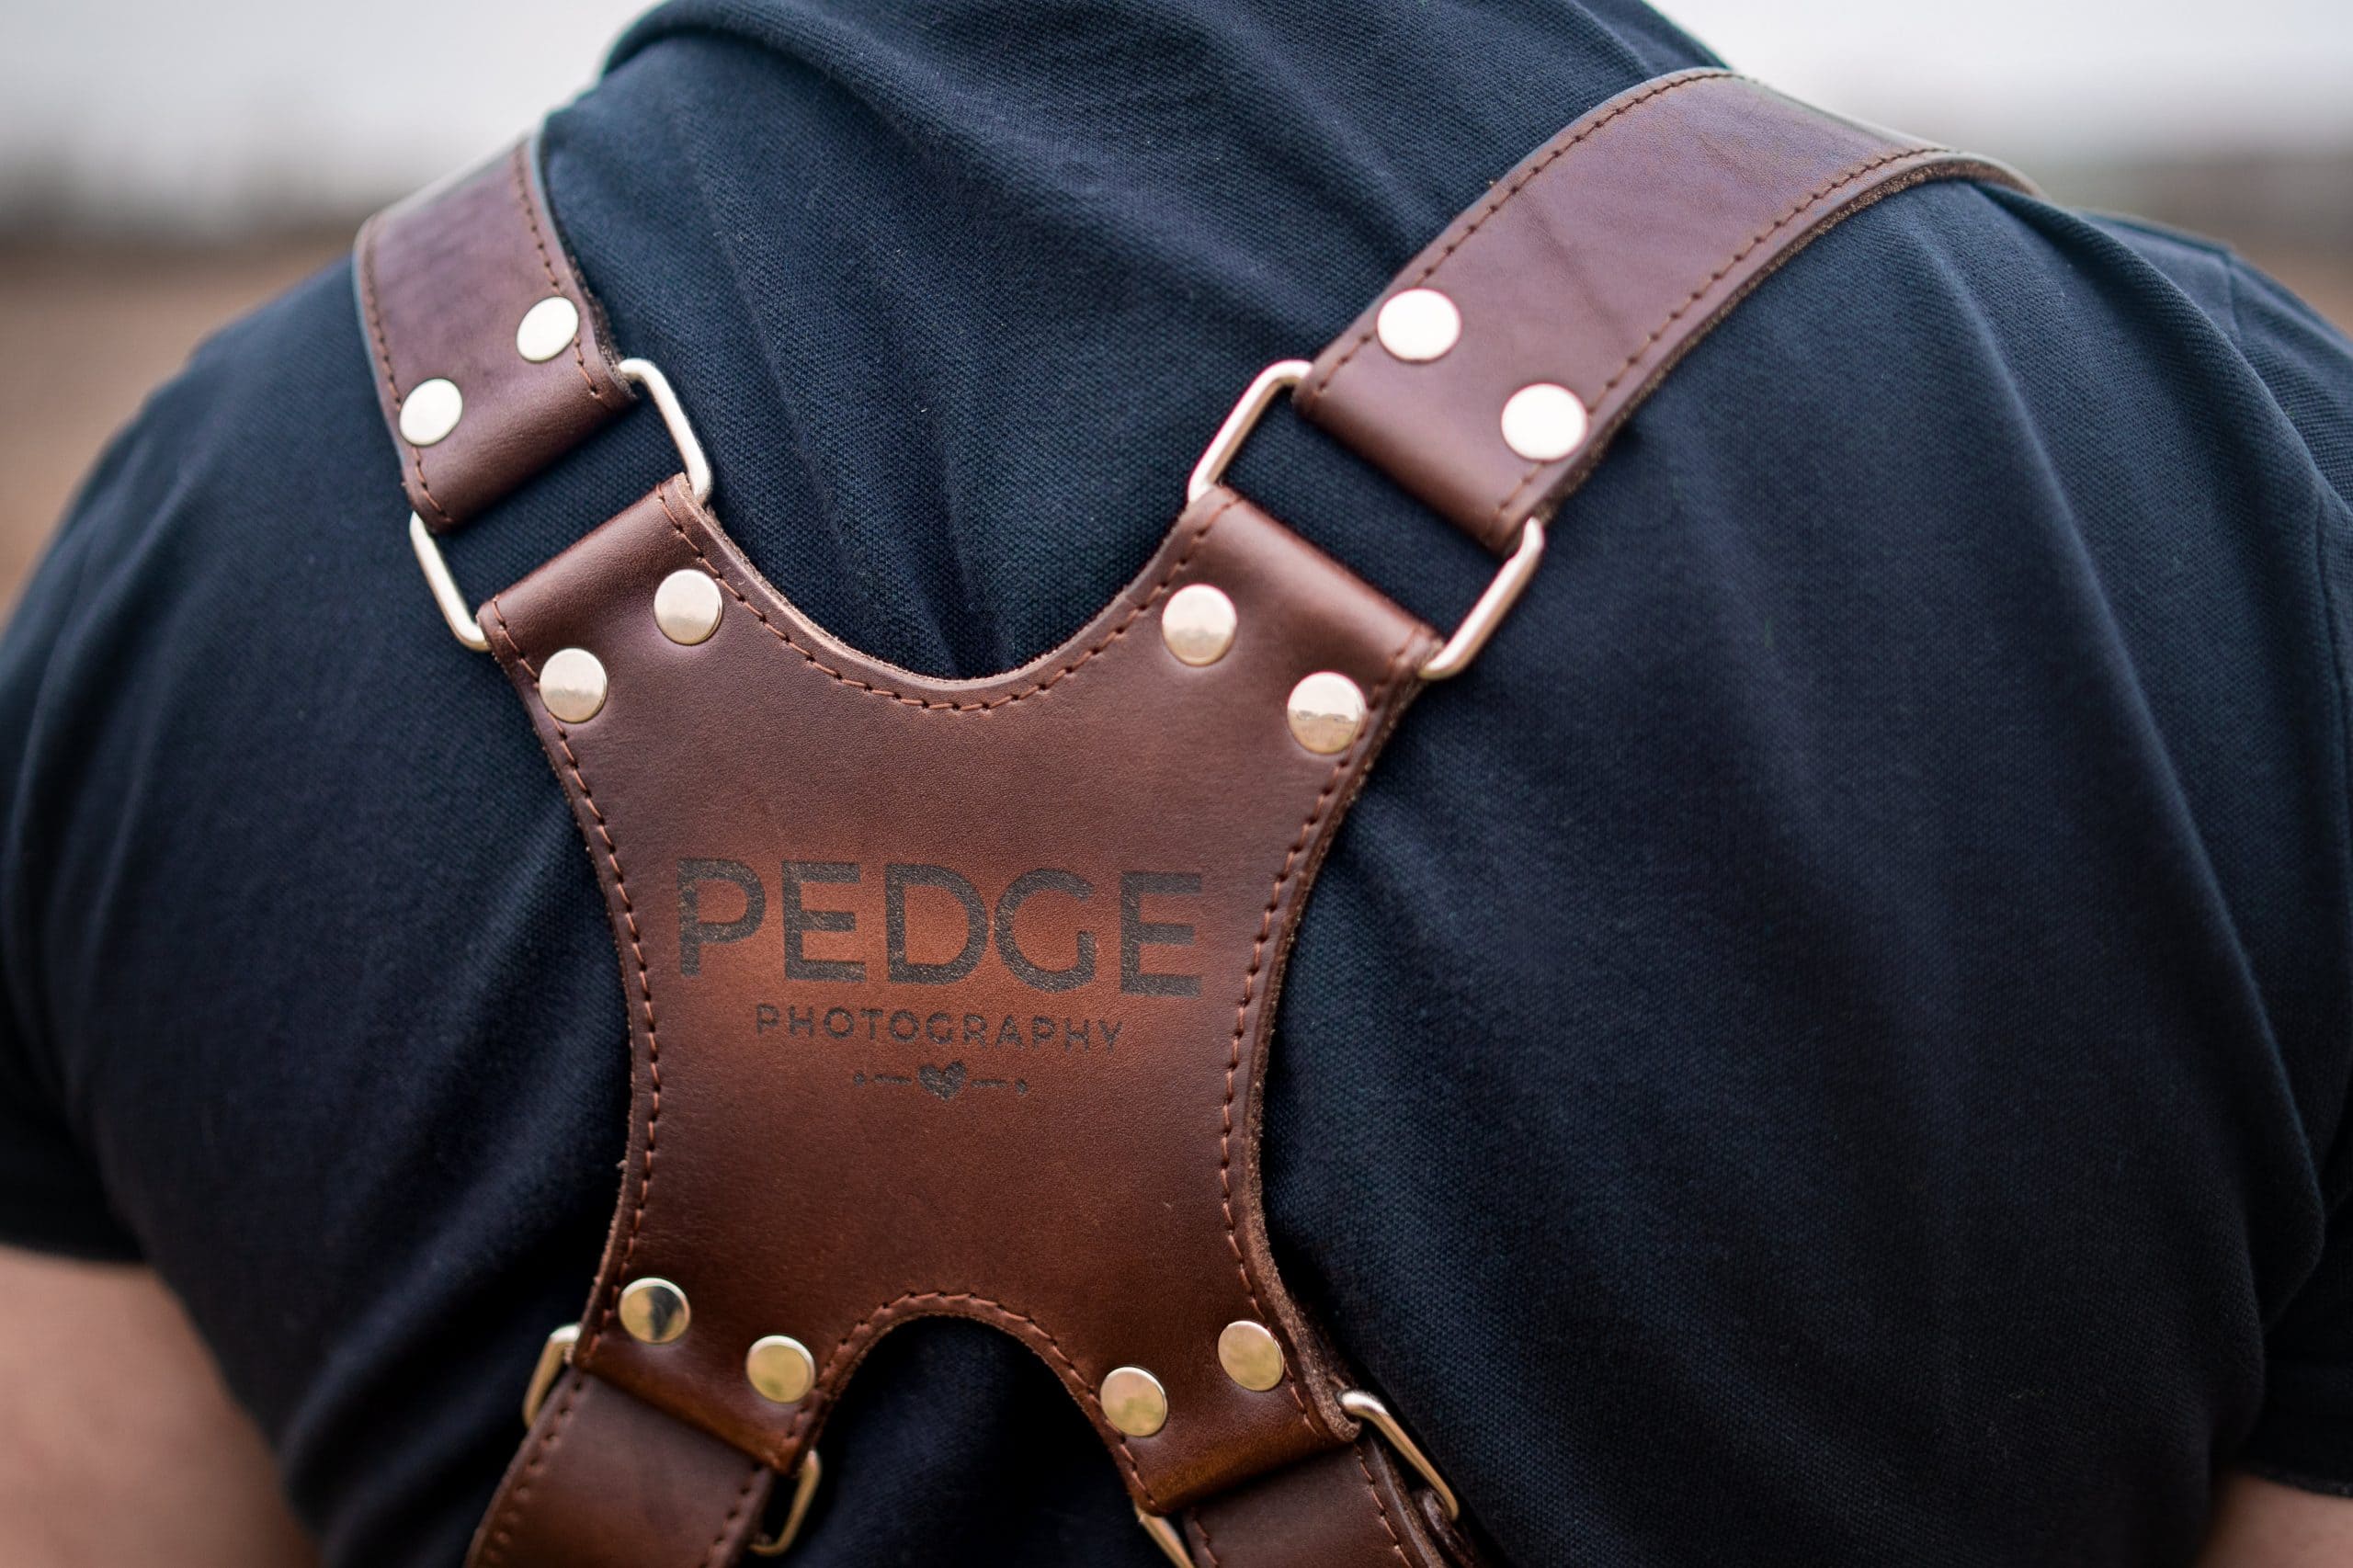 Pedge Photography's dual leather camera holster etched with his company logo.  